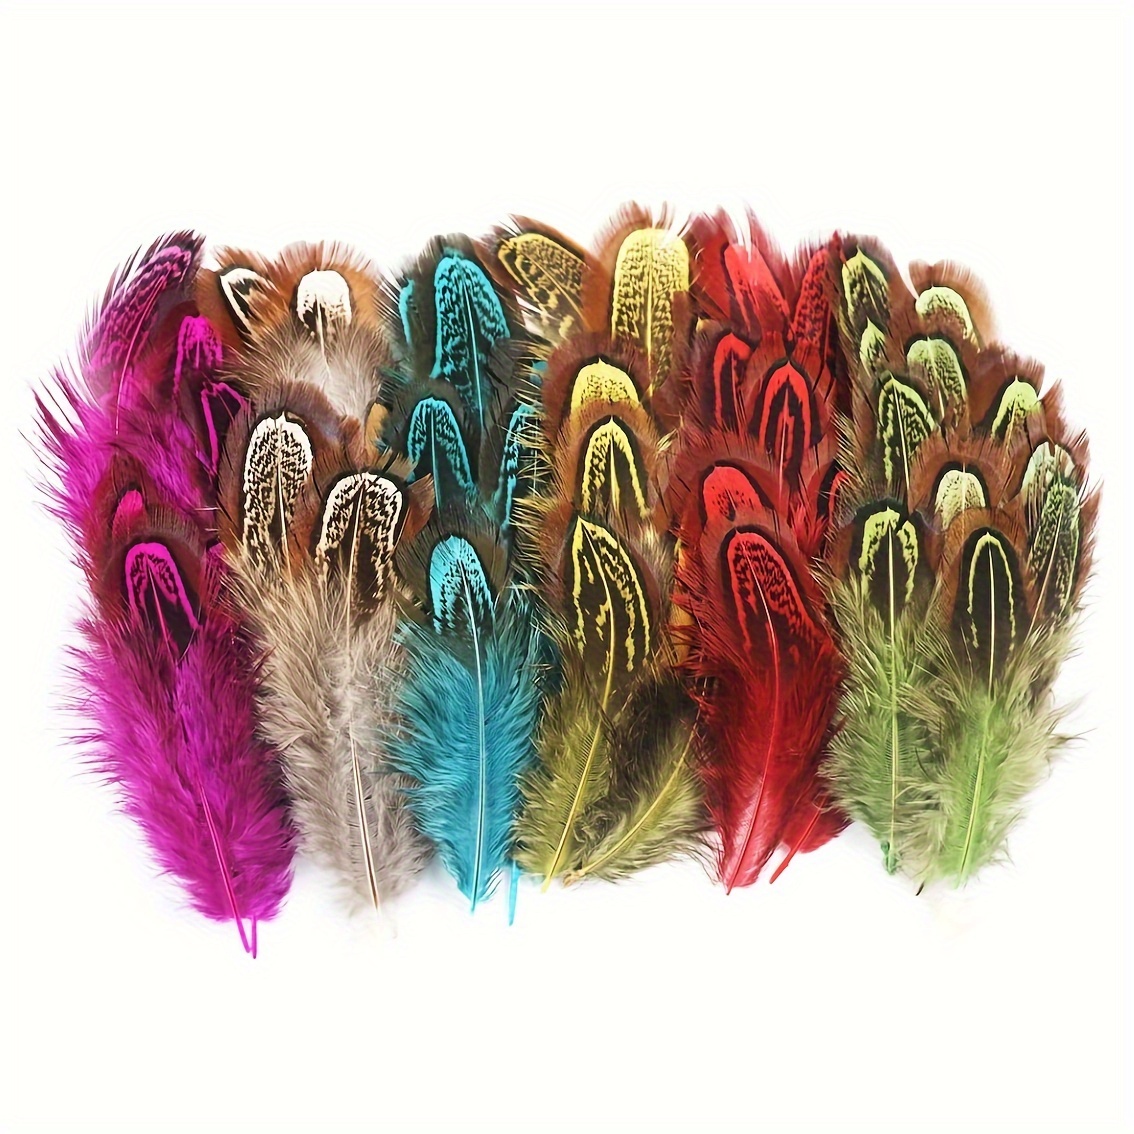 Lady Amherst Pheasant Feathers - Natural